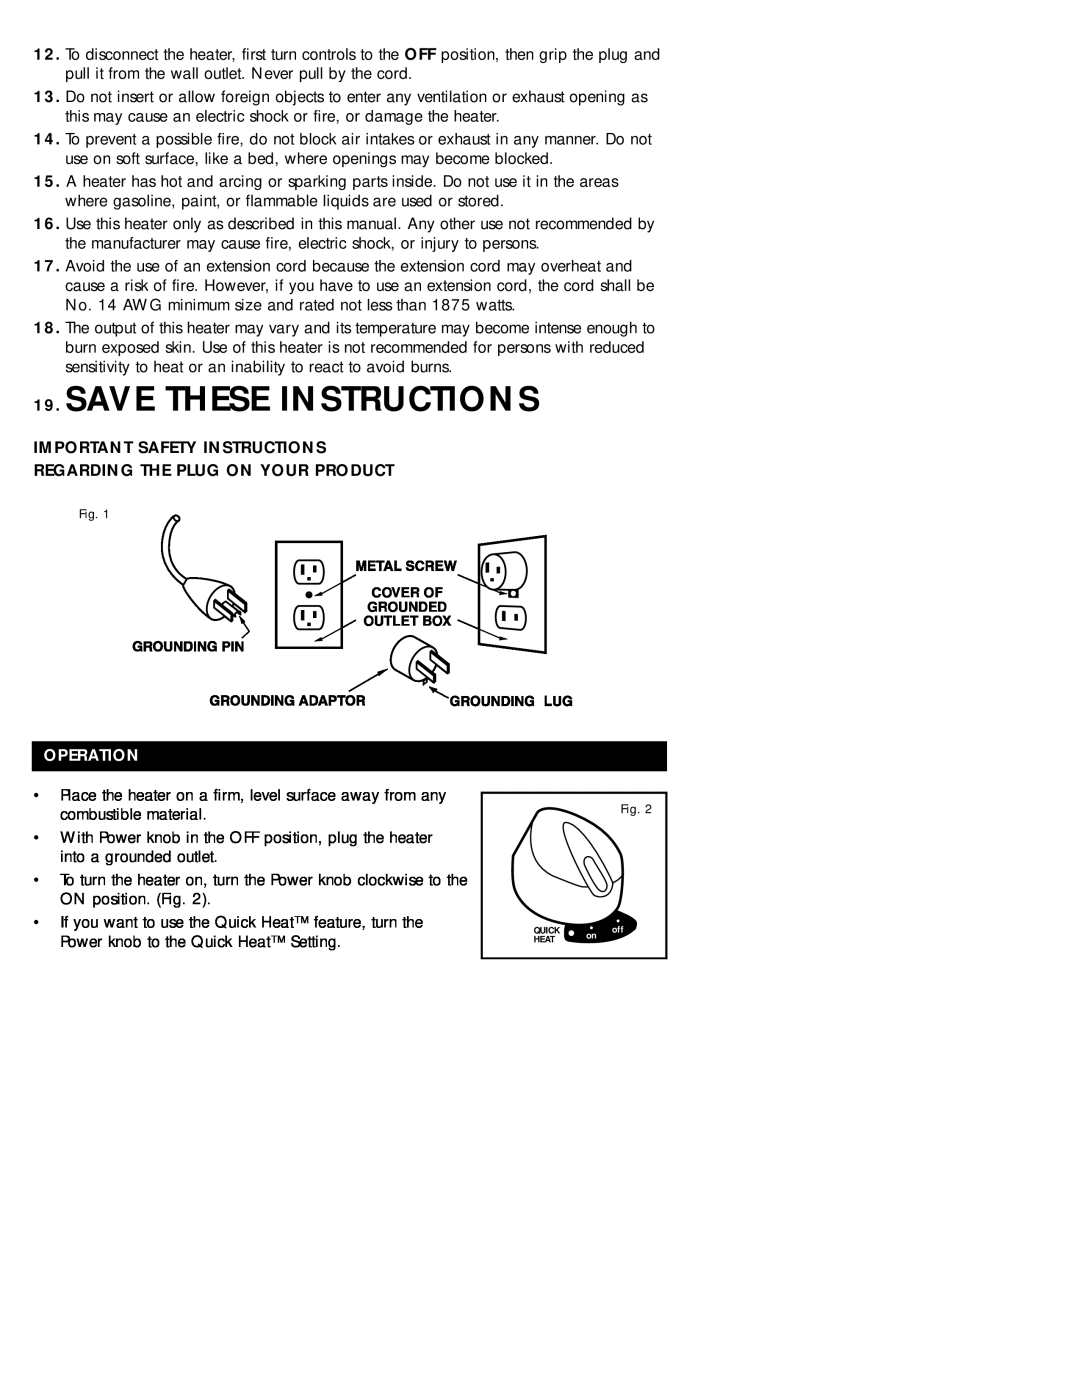 Honeywell HZ-614C Save These Instructions, Operation, Important Safety Instructions, Regarding The Plug On Your Product 